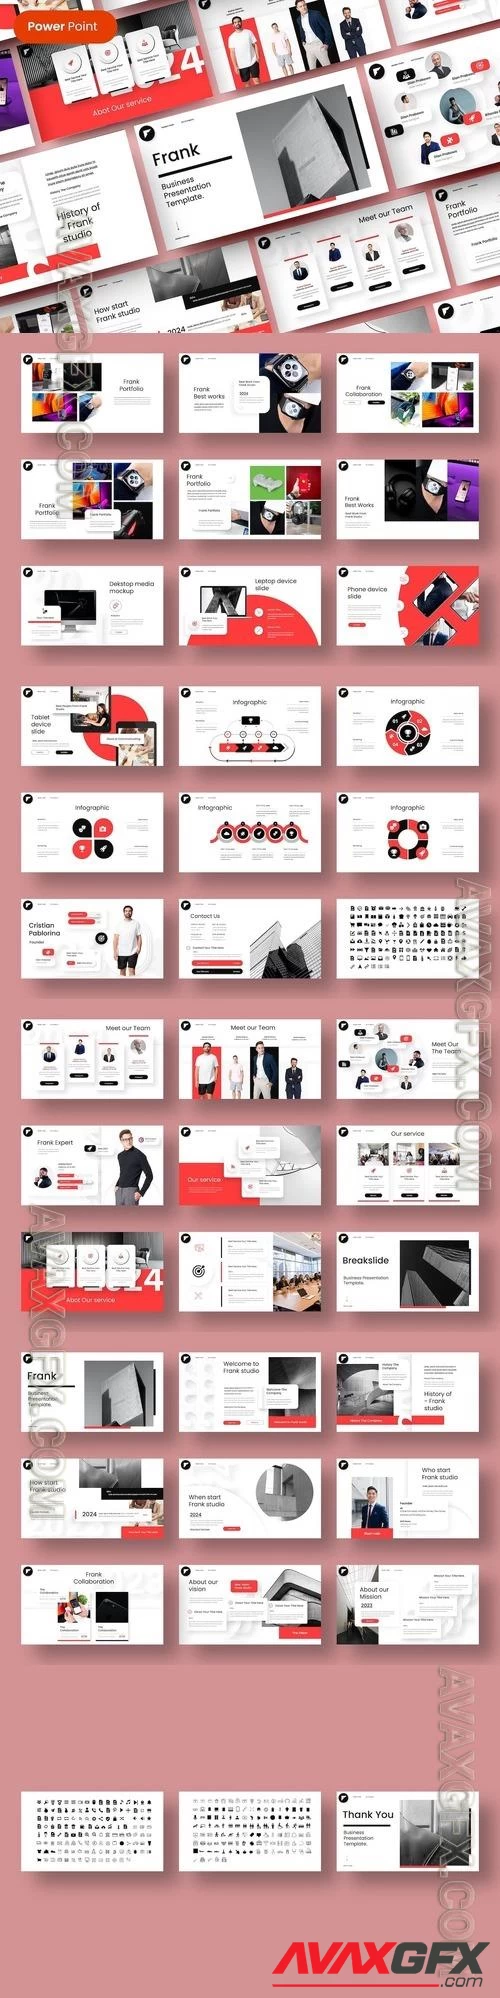 Frank - Business PowerPoint Template